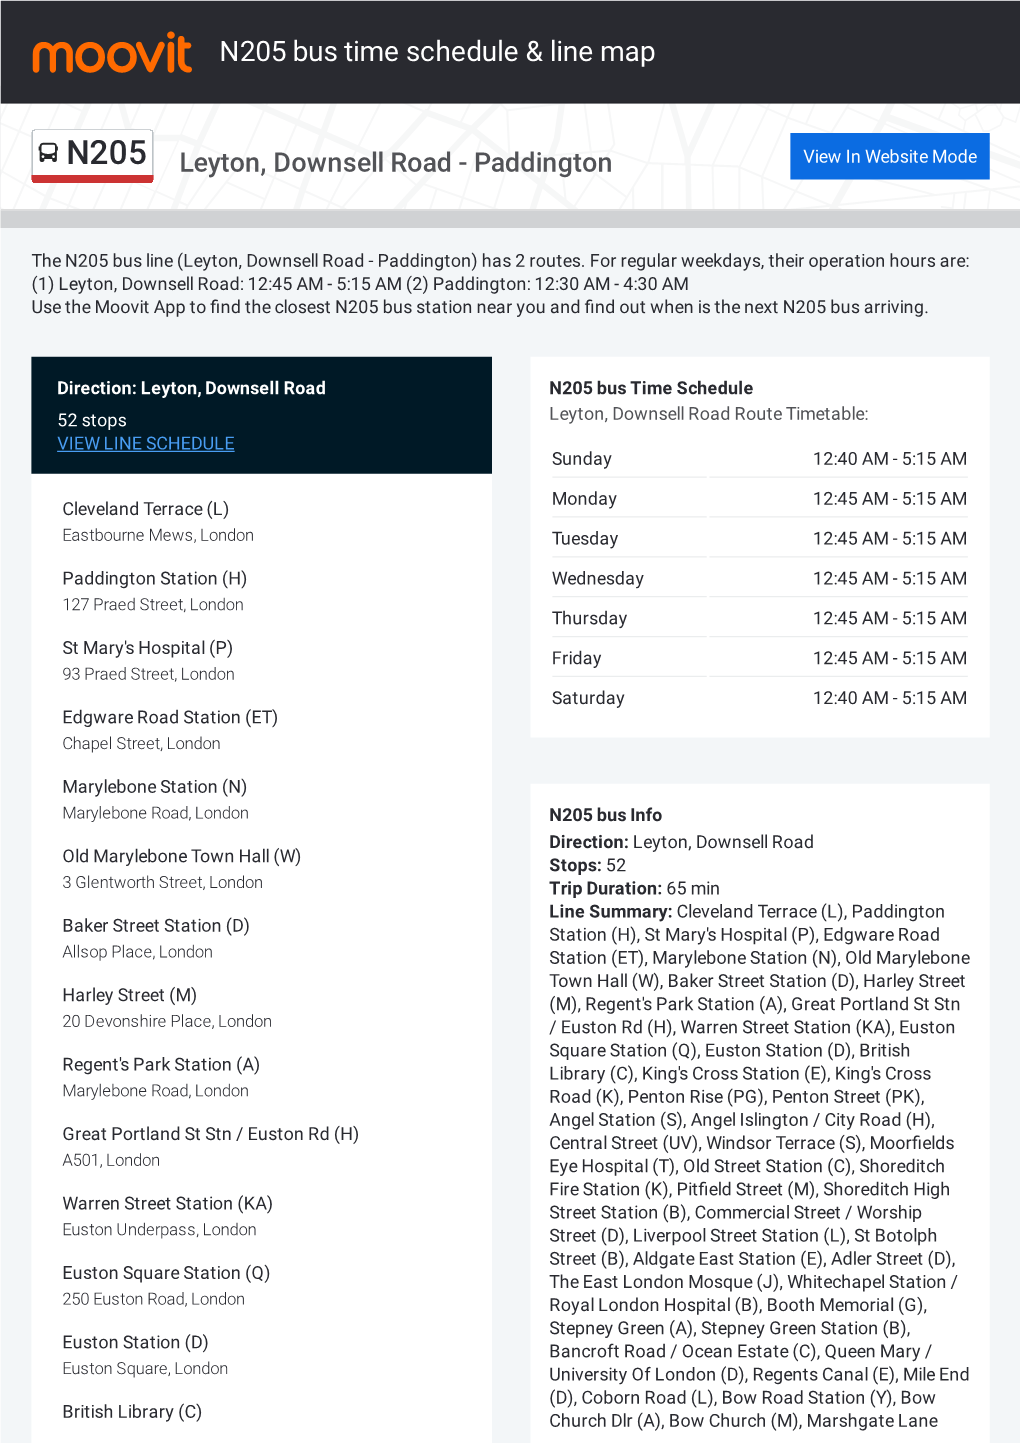 N205 Bus Time Schedule & Line Route